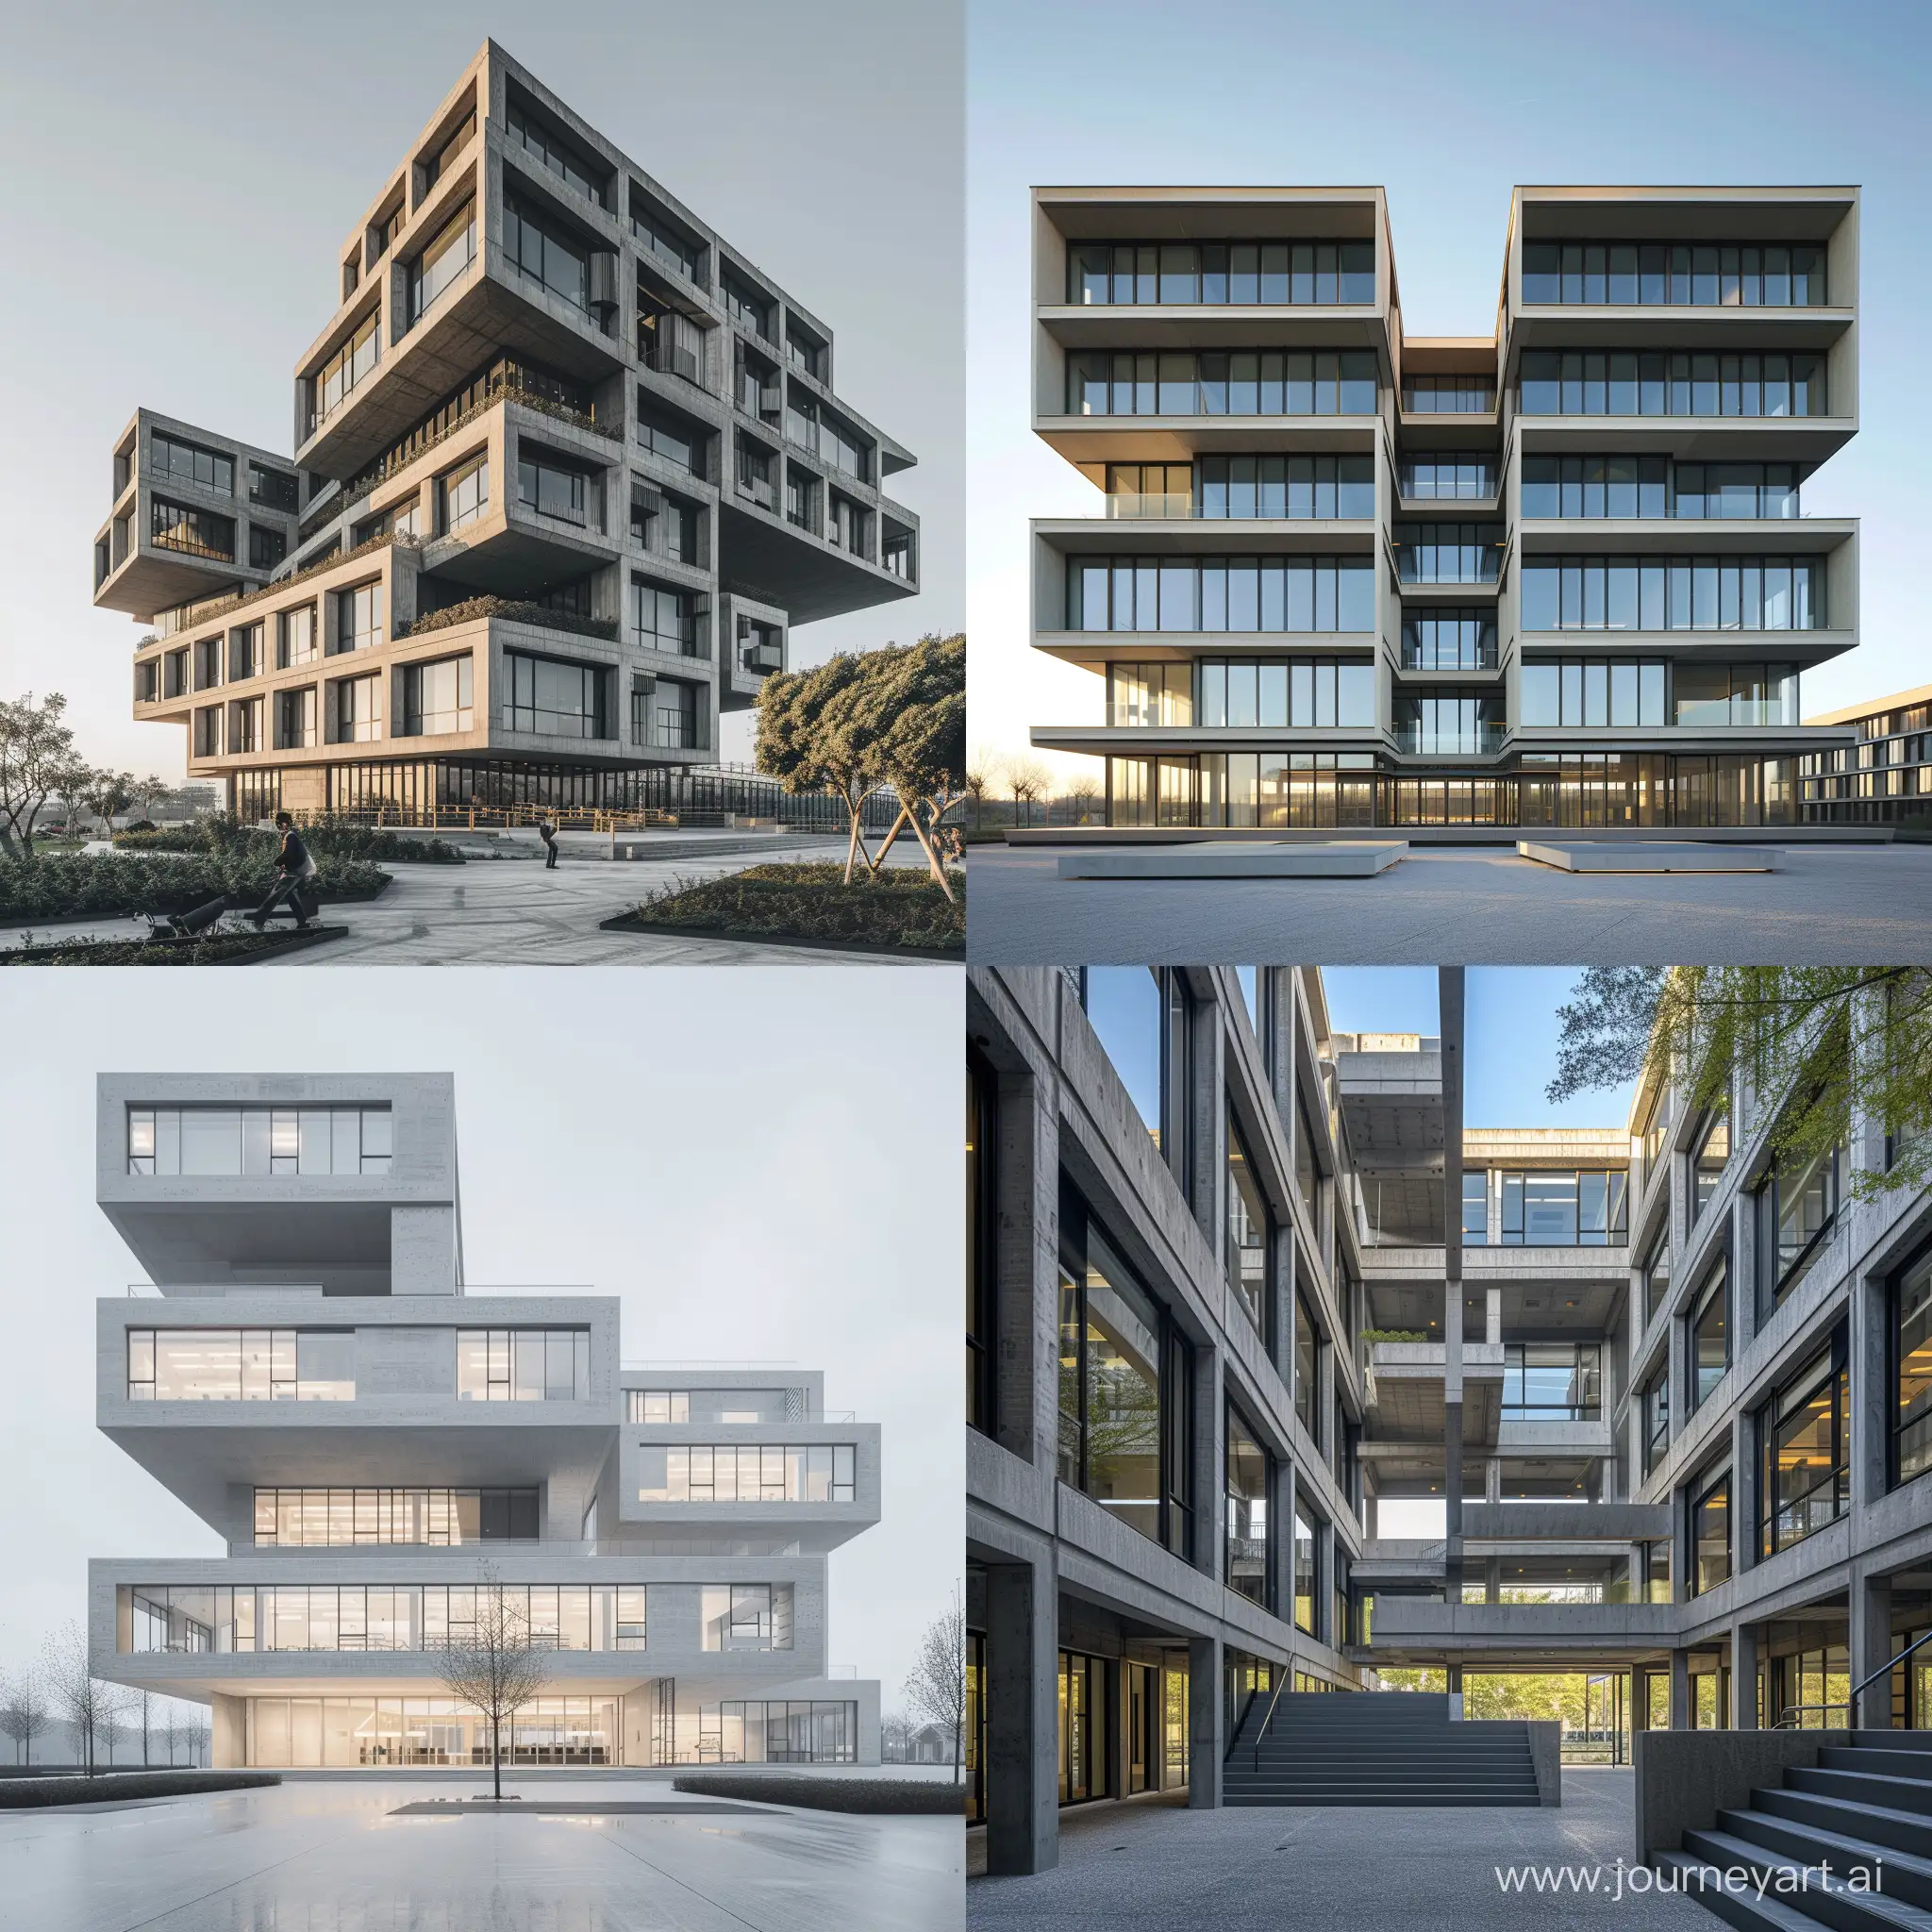 /imagine a instutucional bulding contest architecture, 8 floors,exterior,perspective,Photographed by Iwan Baan, masterpiece,8k